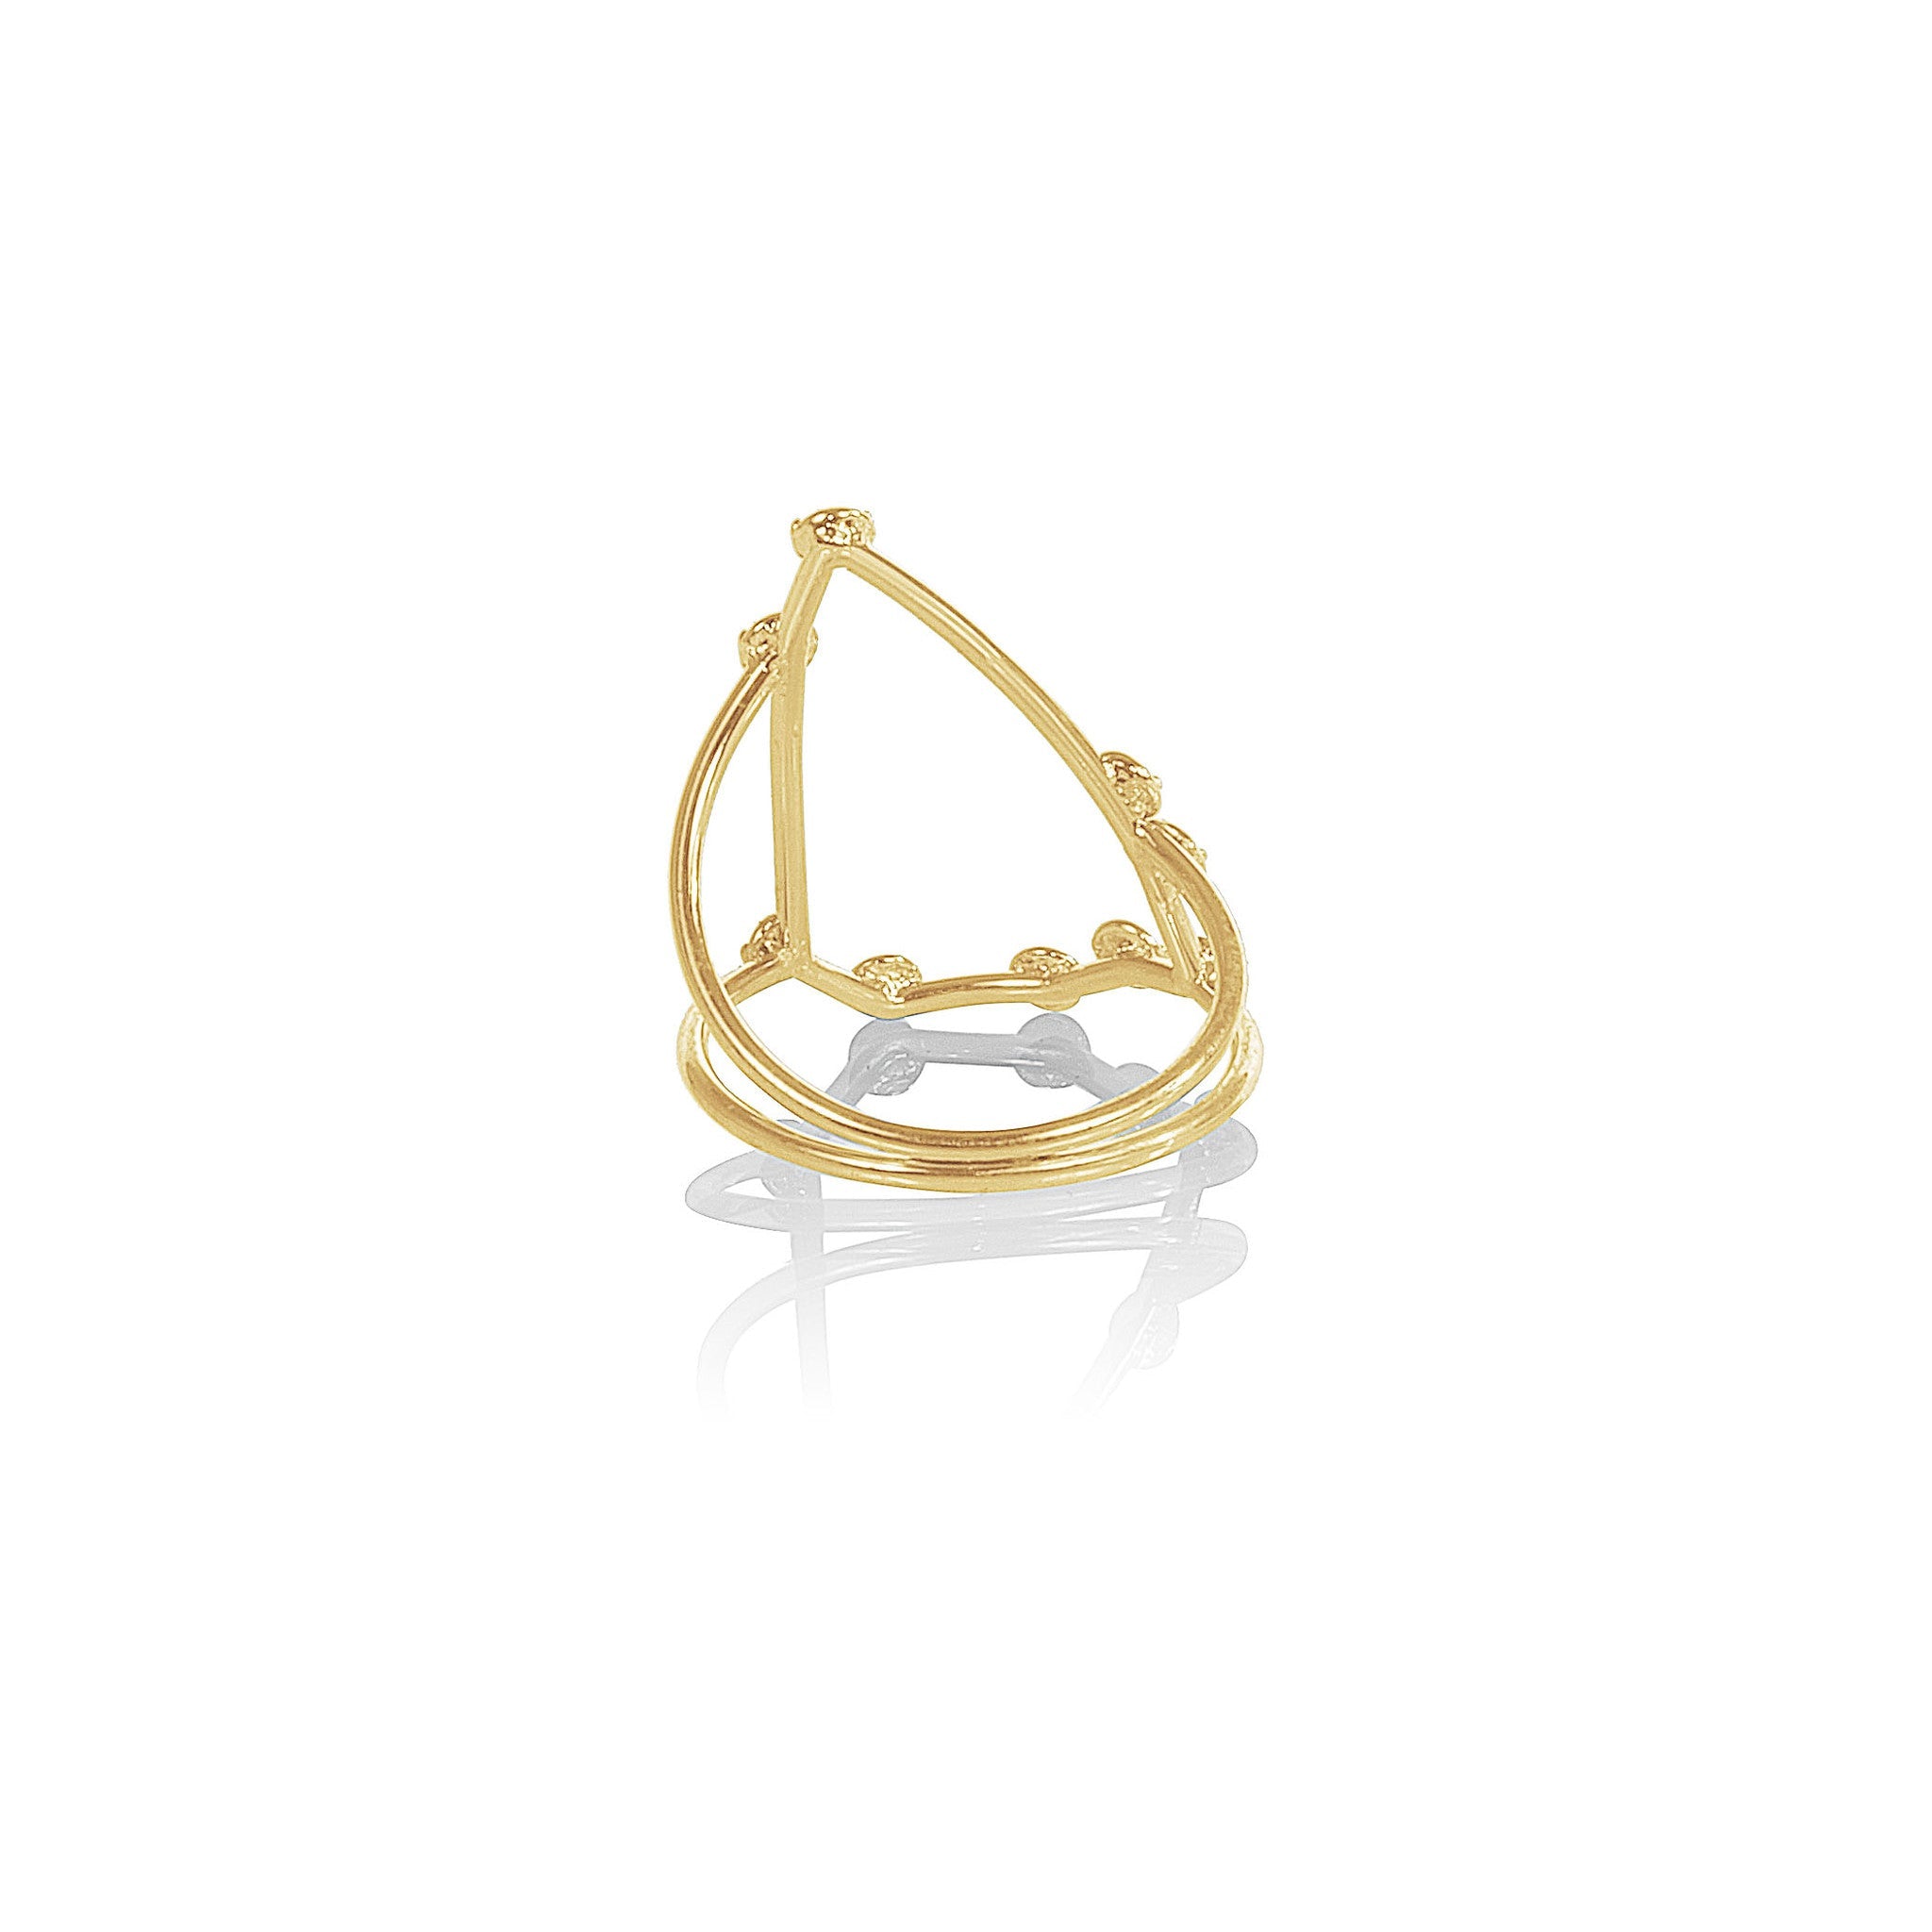 IN STOCK 18ct Yellow Gold Capricorn Constellation Ring